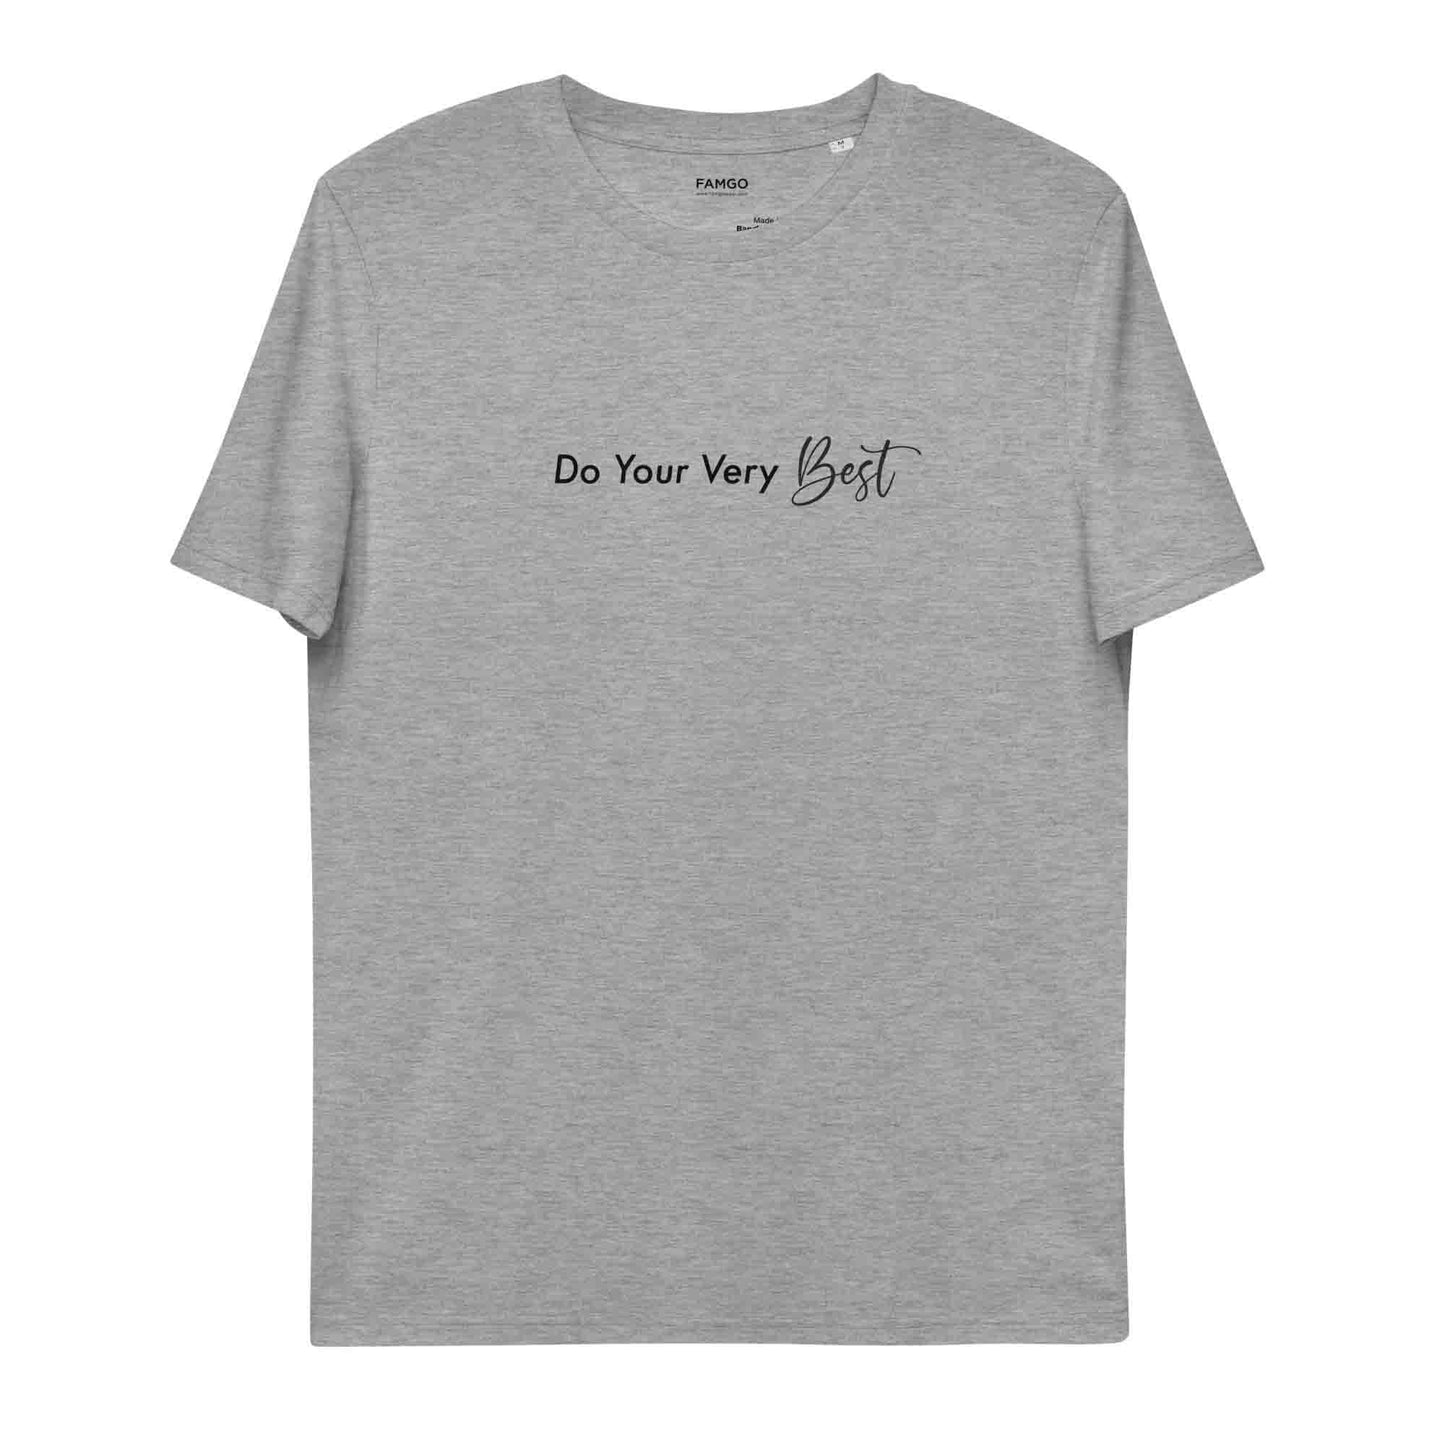 Women light gray motivational t-shirt with motivational quote, "Do Your Very Best."